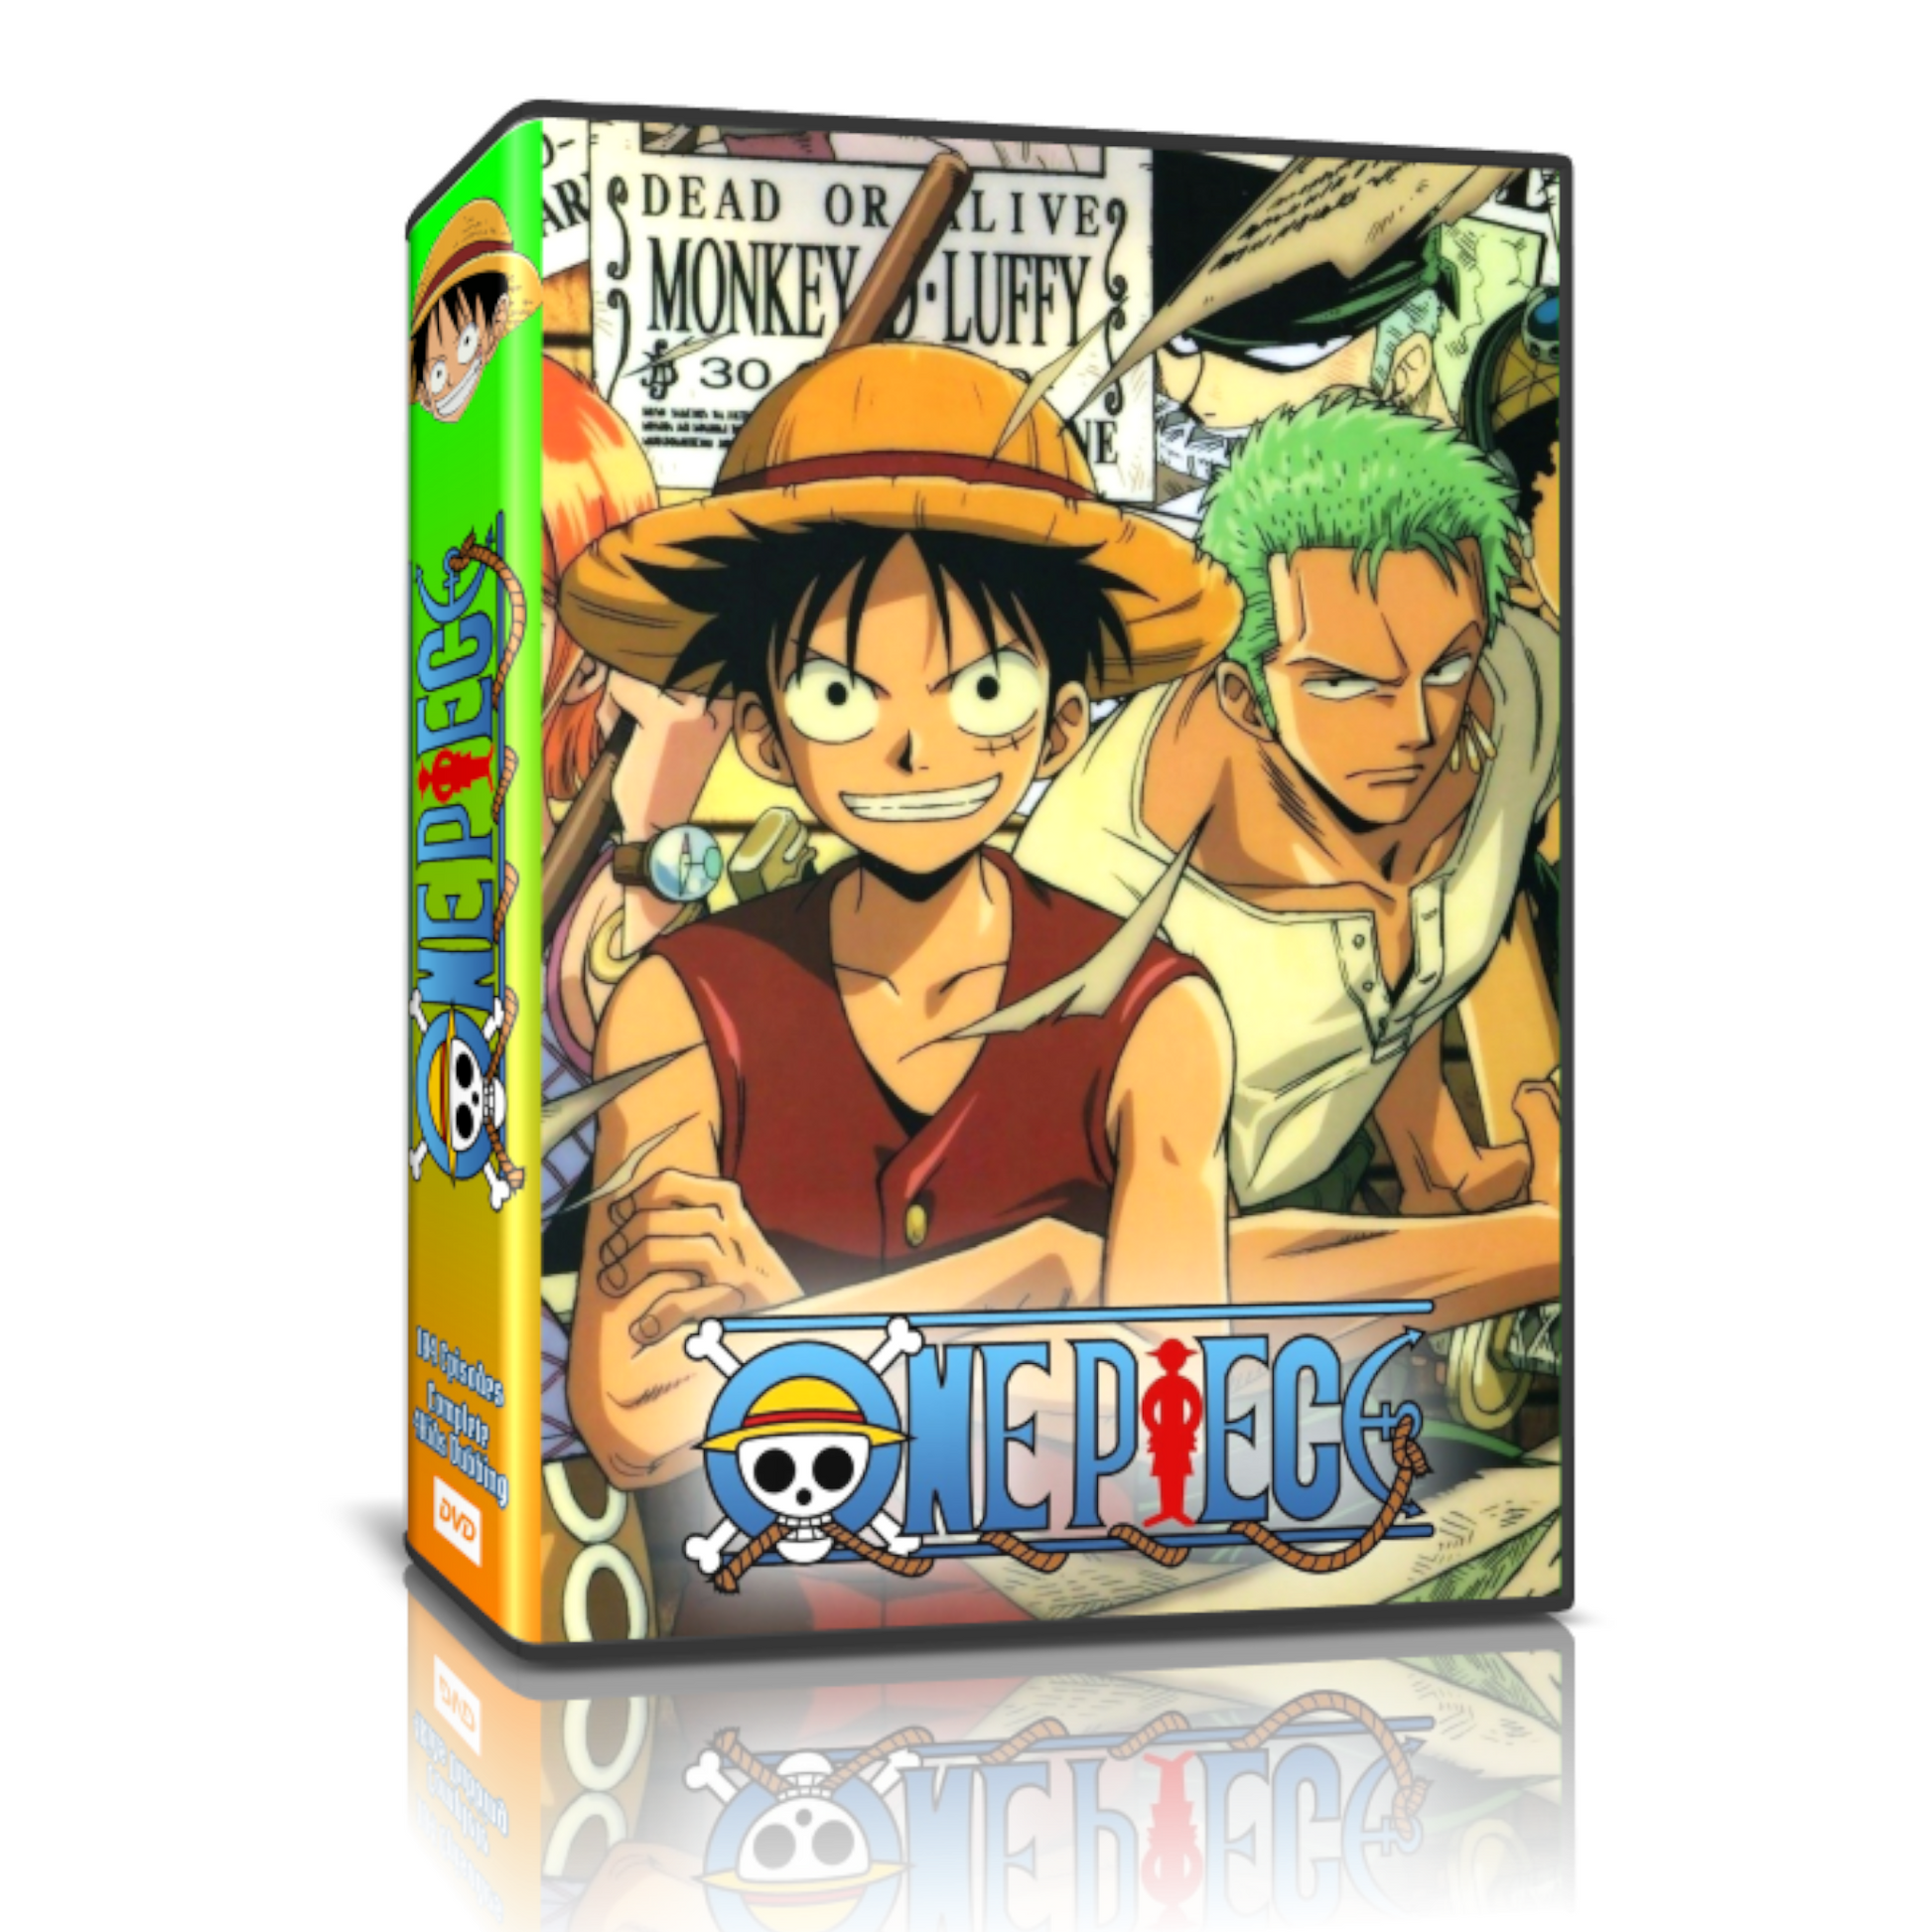 Anime DVD One Piece Episode 1-720 Complete ENGLISH DUBBED Box Set - BRAND  NEW